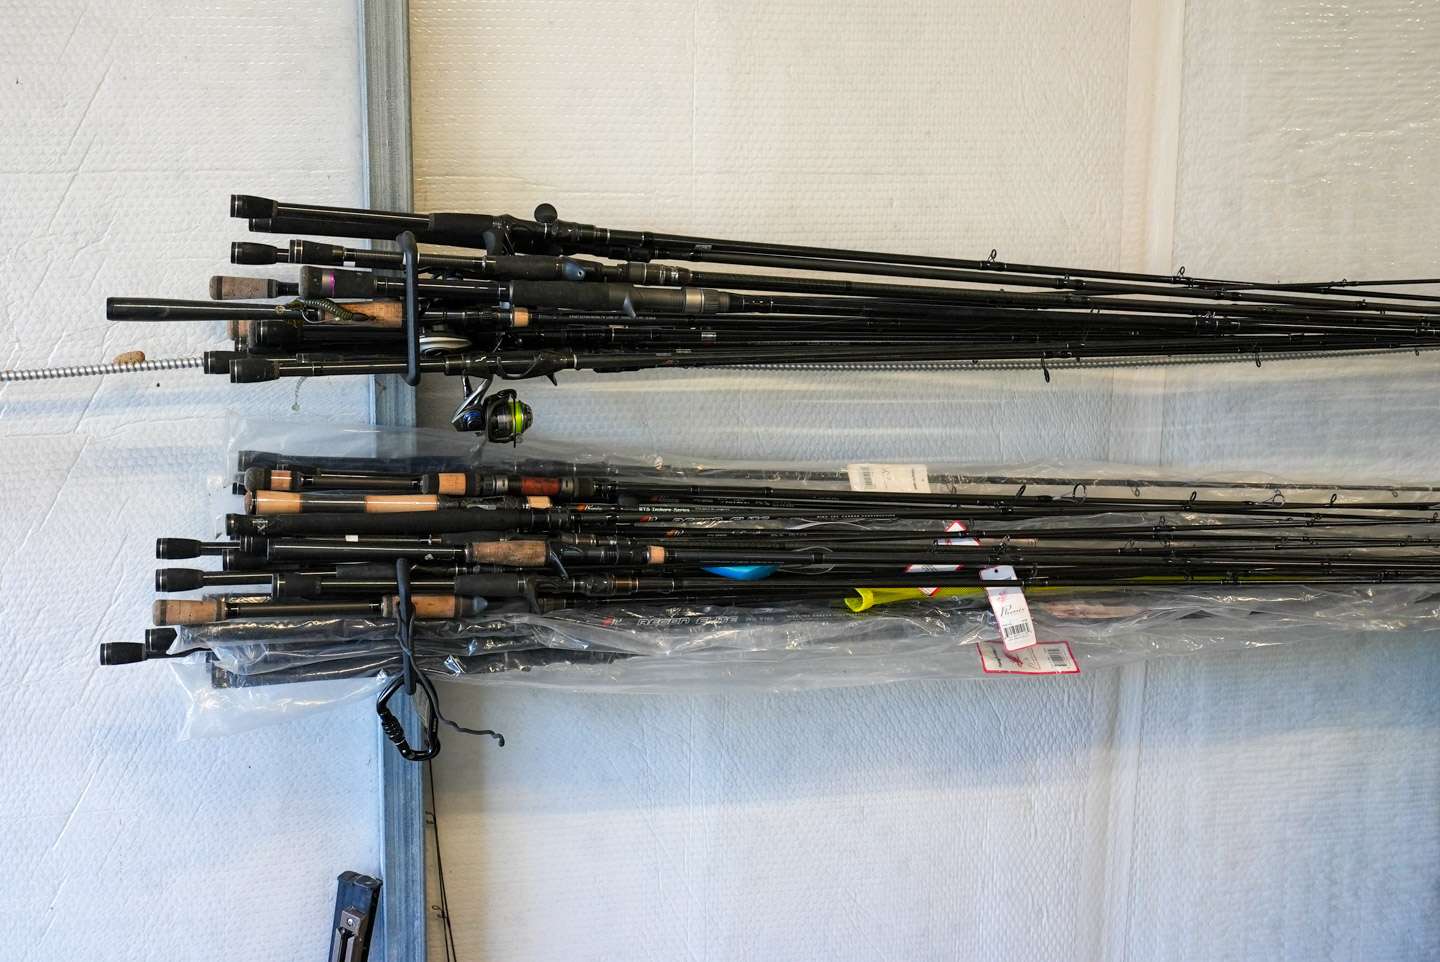 Although Davis only had a few rods in the boat, he keeps plenty of rods at the ready. 